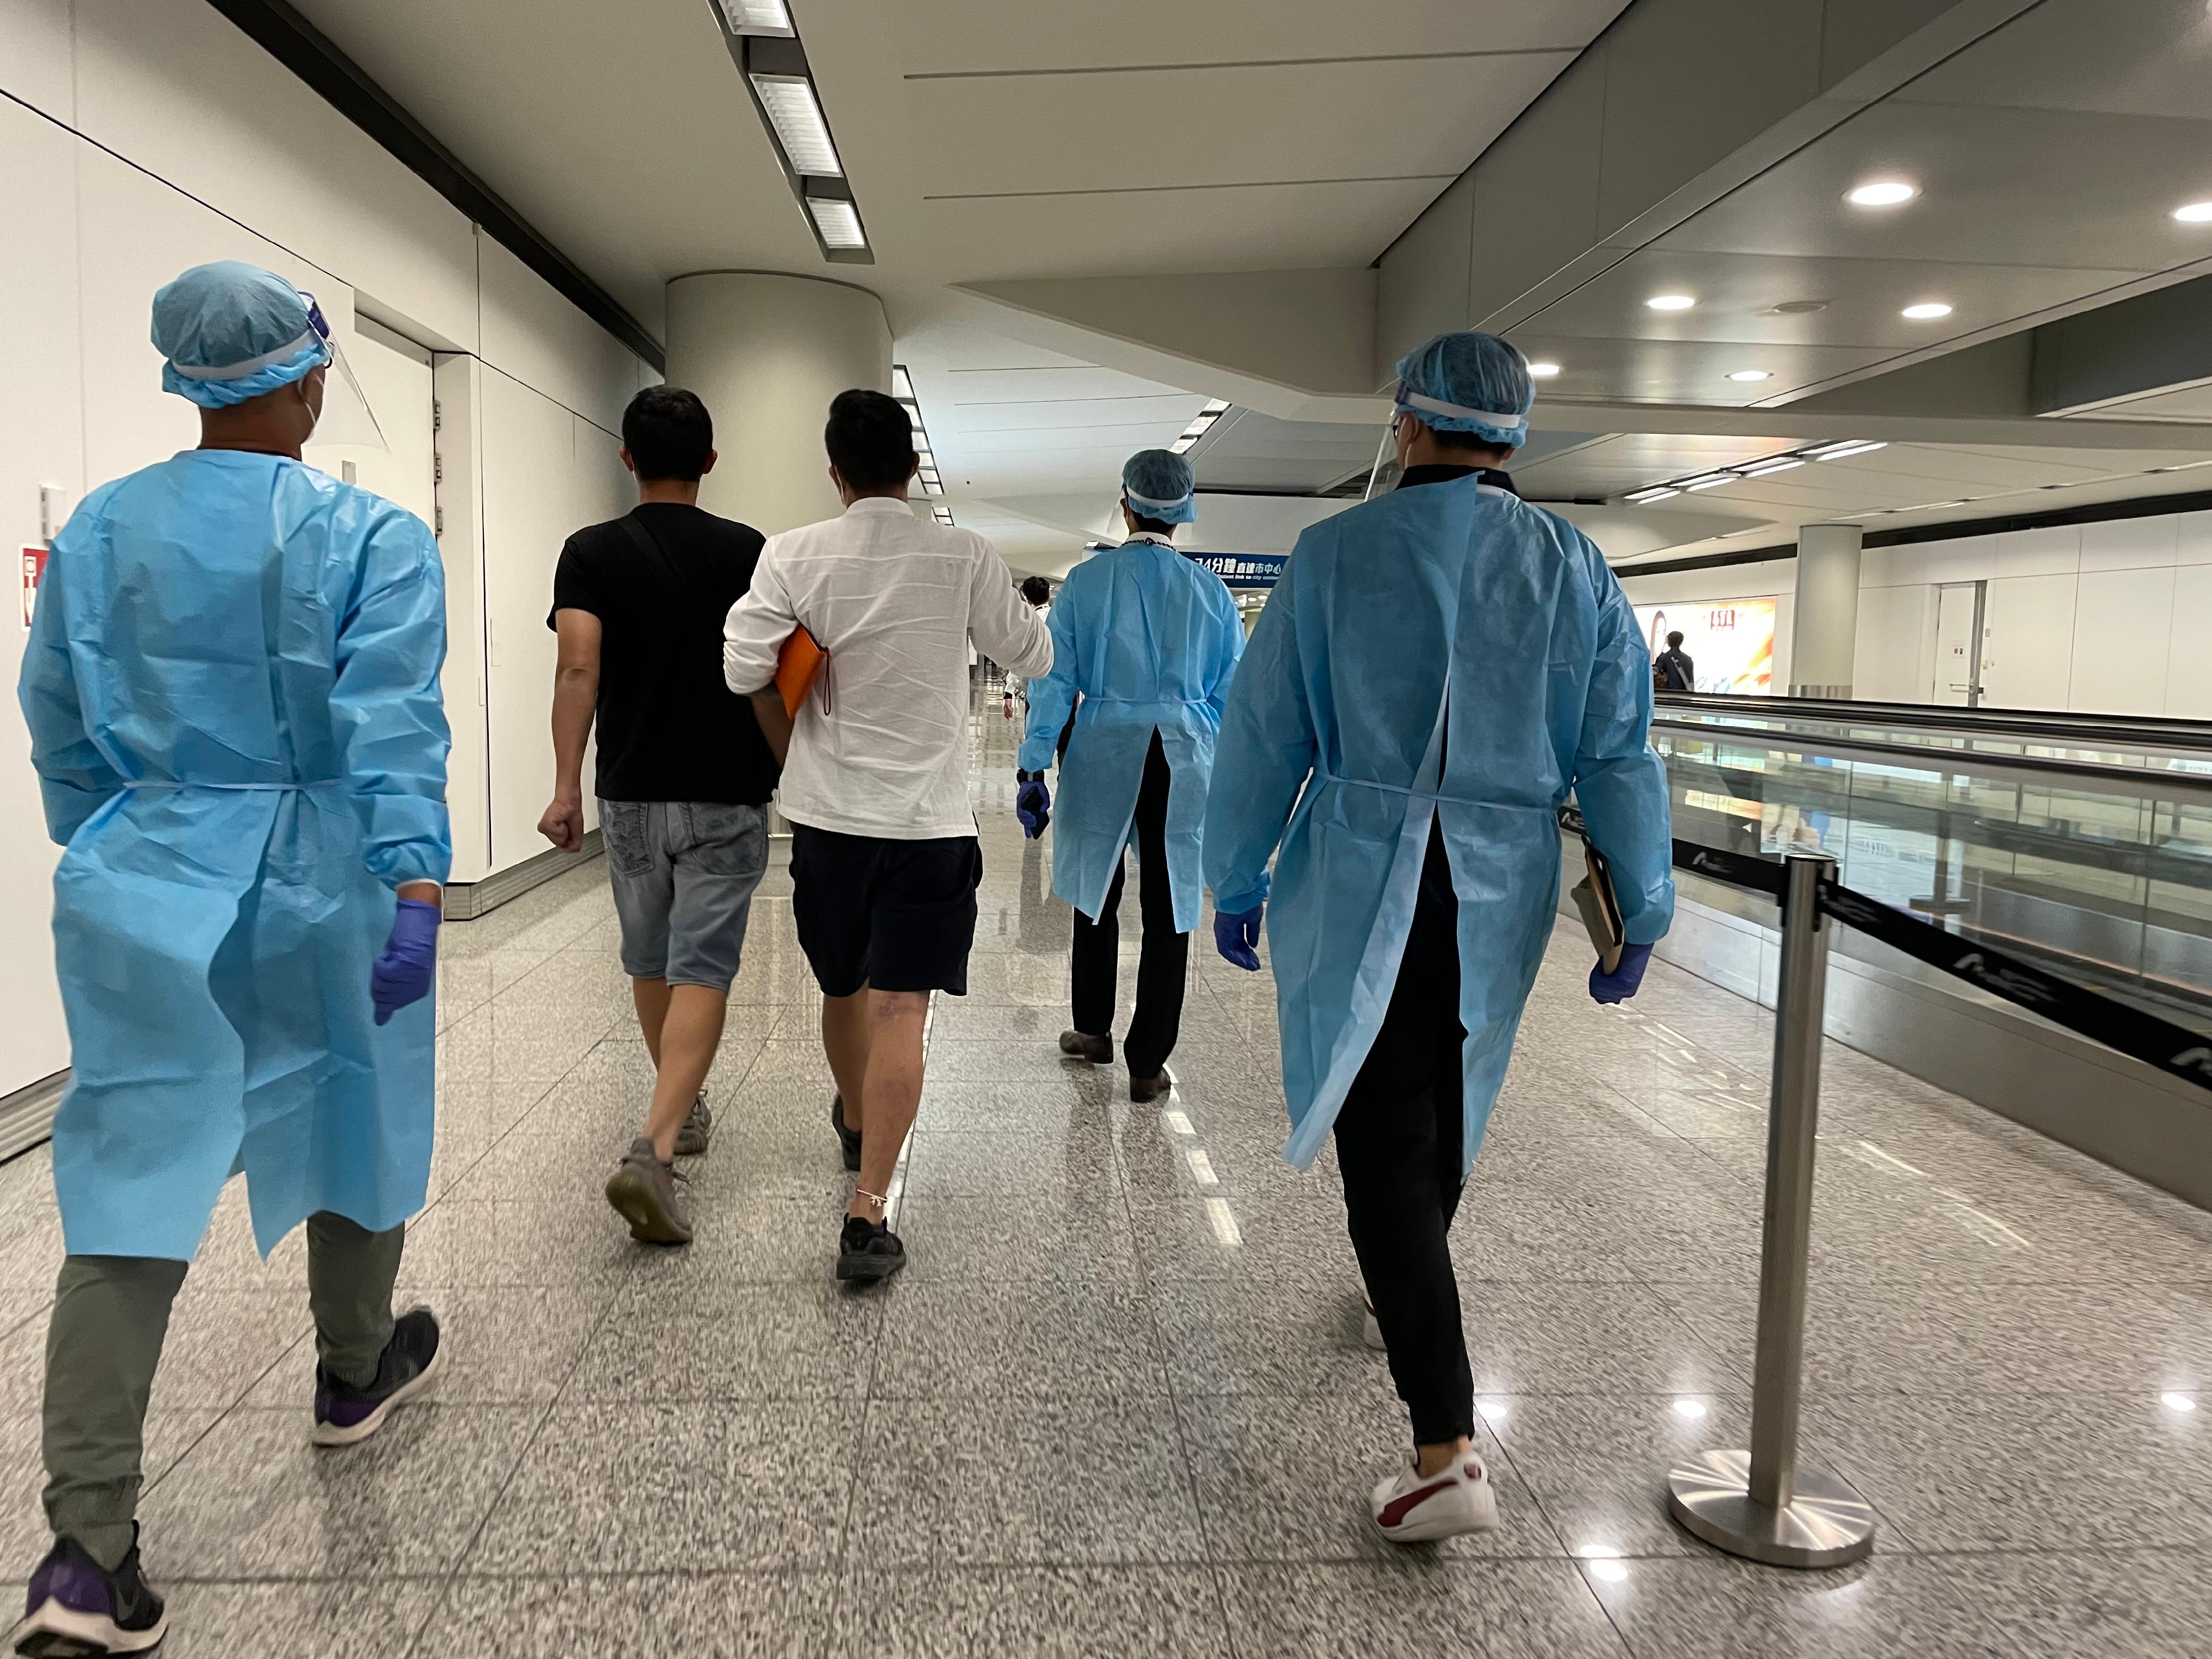 Three assistance seekers safely arrived at Hong Kong International Airport today (August 25). Photo shows Immigration staff in protective equipment assisting the concerned assistance seekers to proceed to the designated counters to go through immigration clearance.